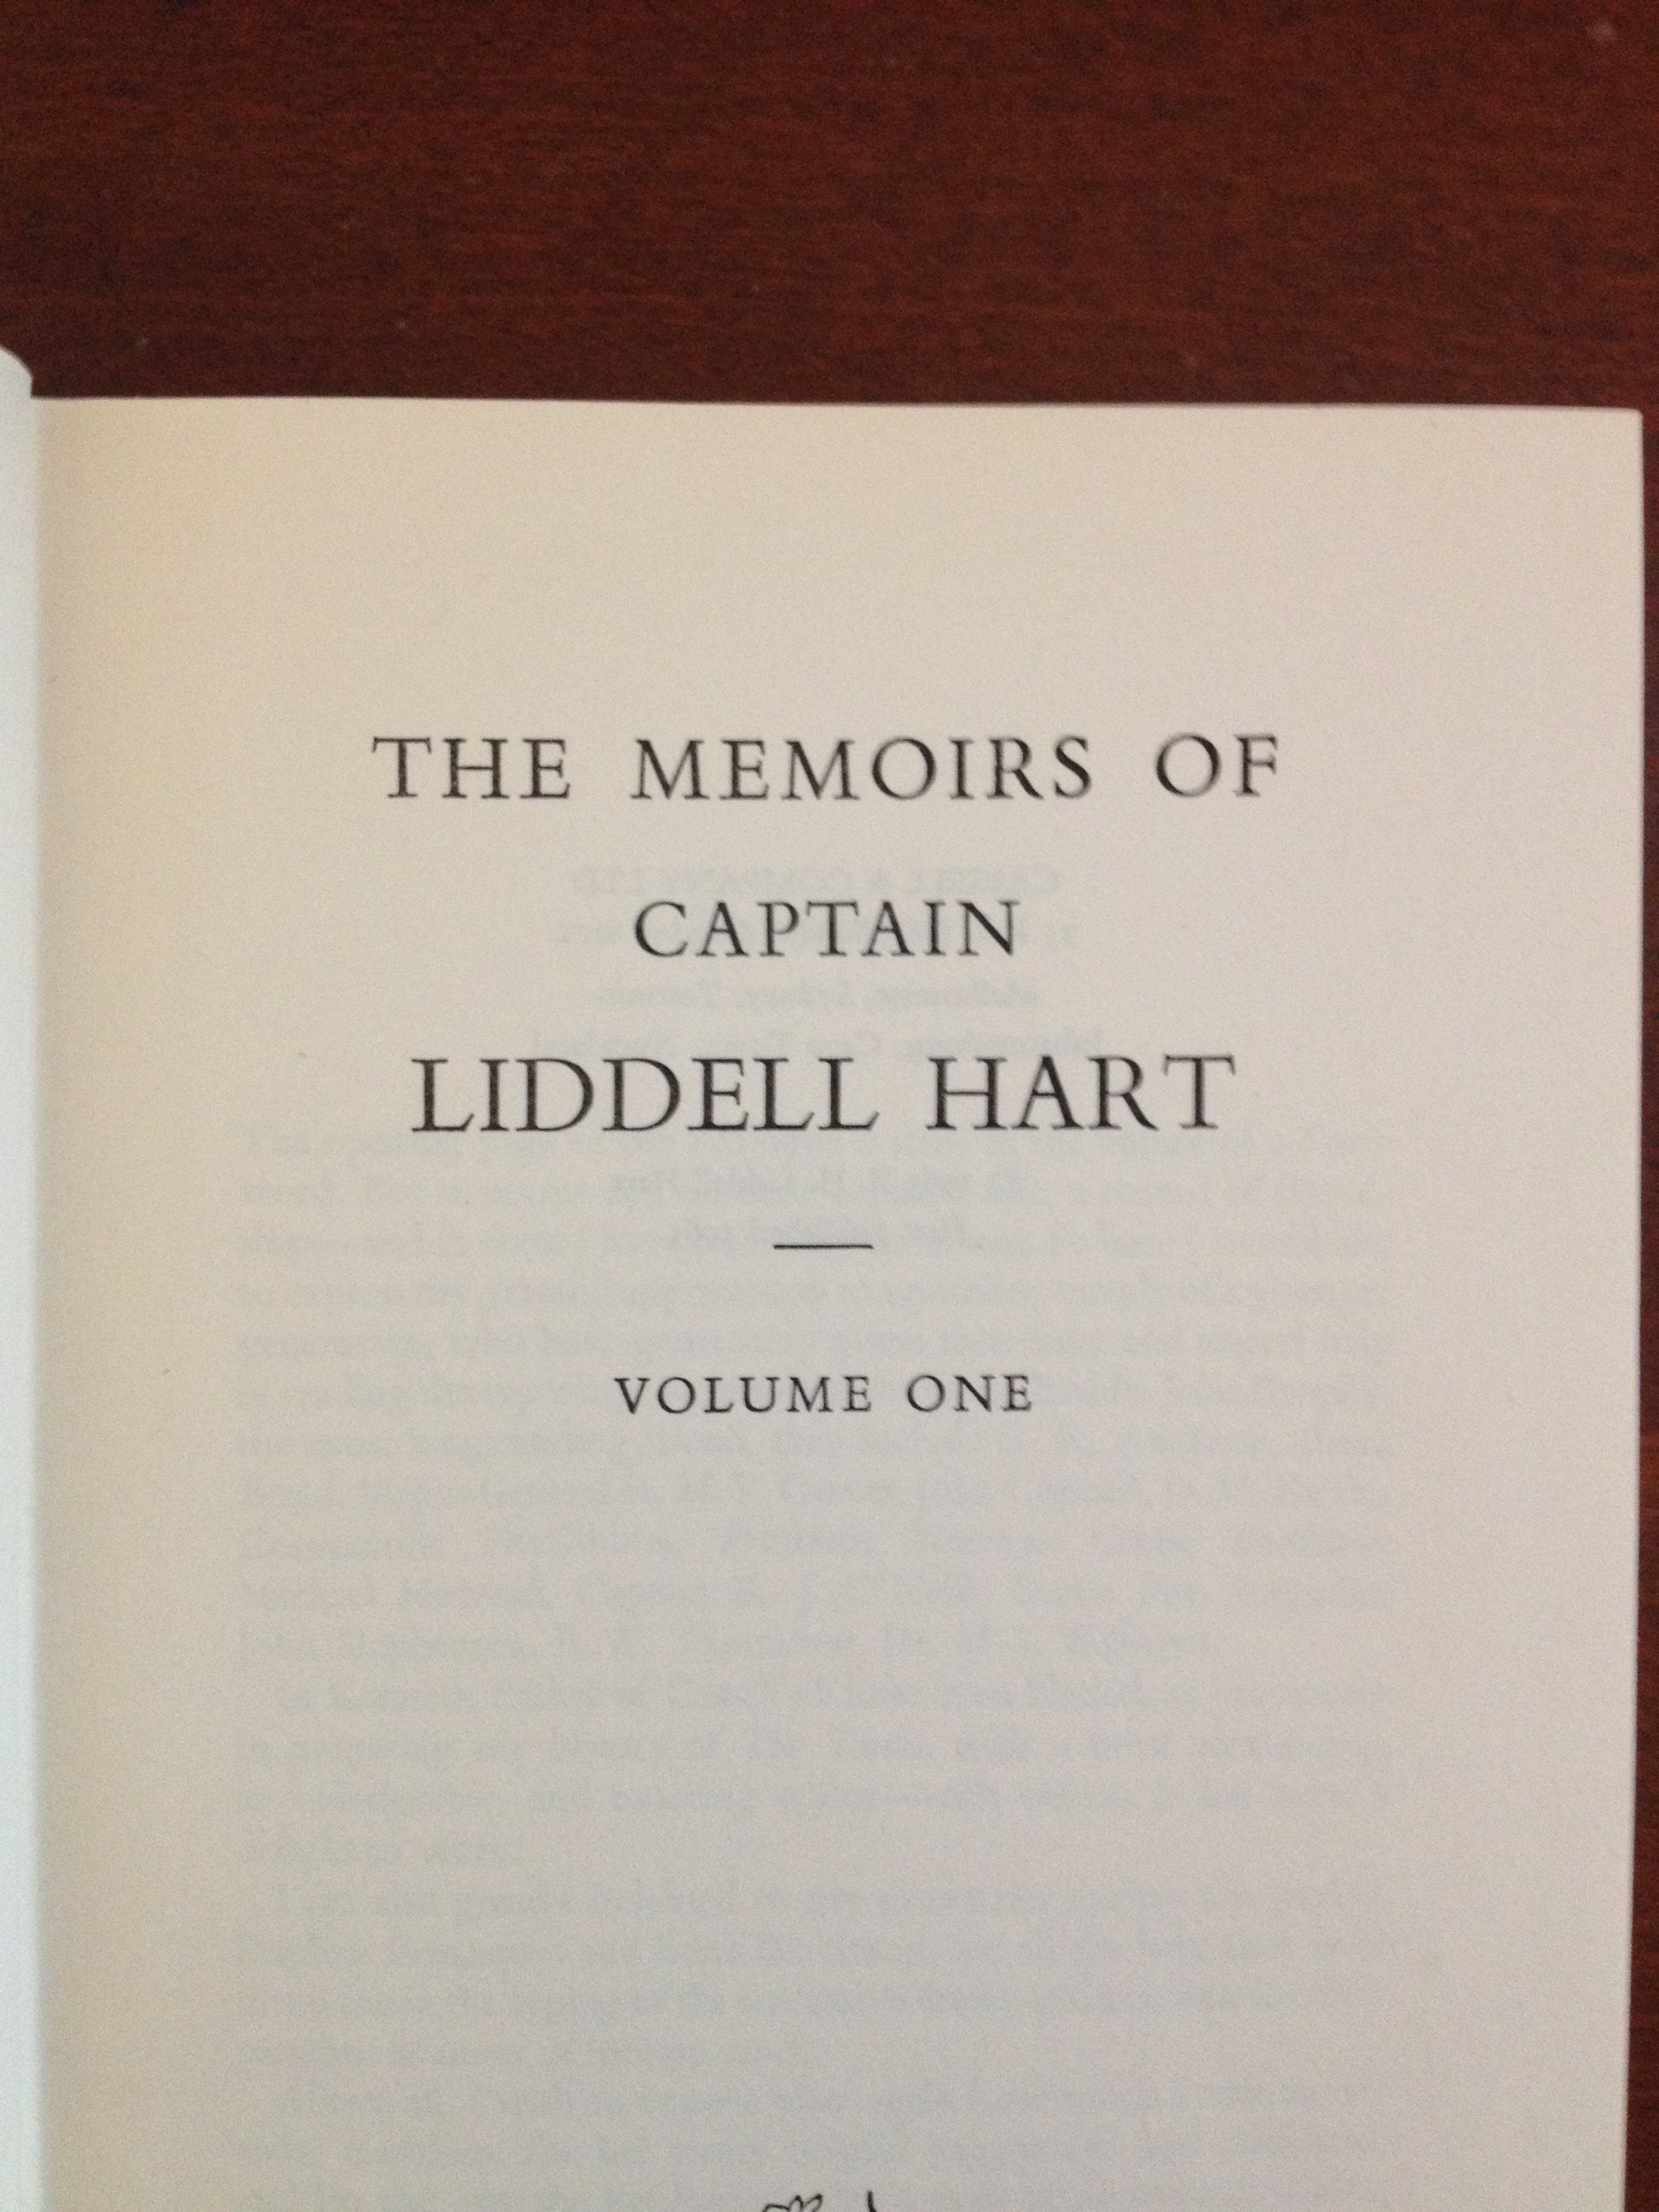 MEMOIRS [2 VOLUMES]  BY: LIDDELL HART BooksCardsNBikes